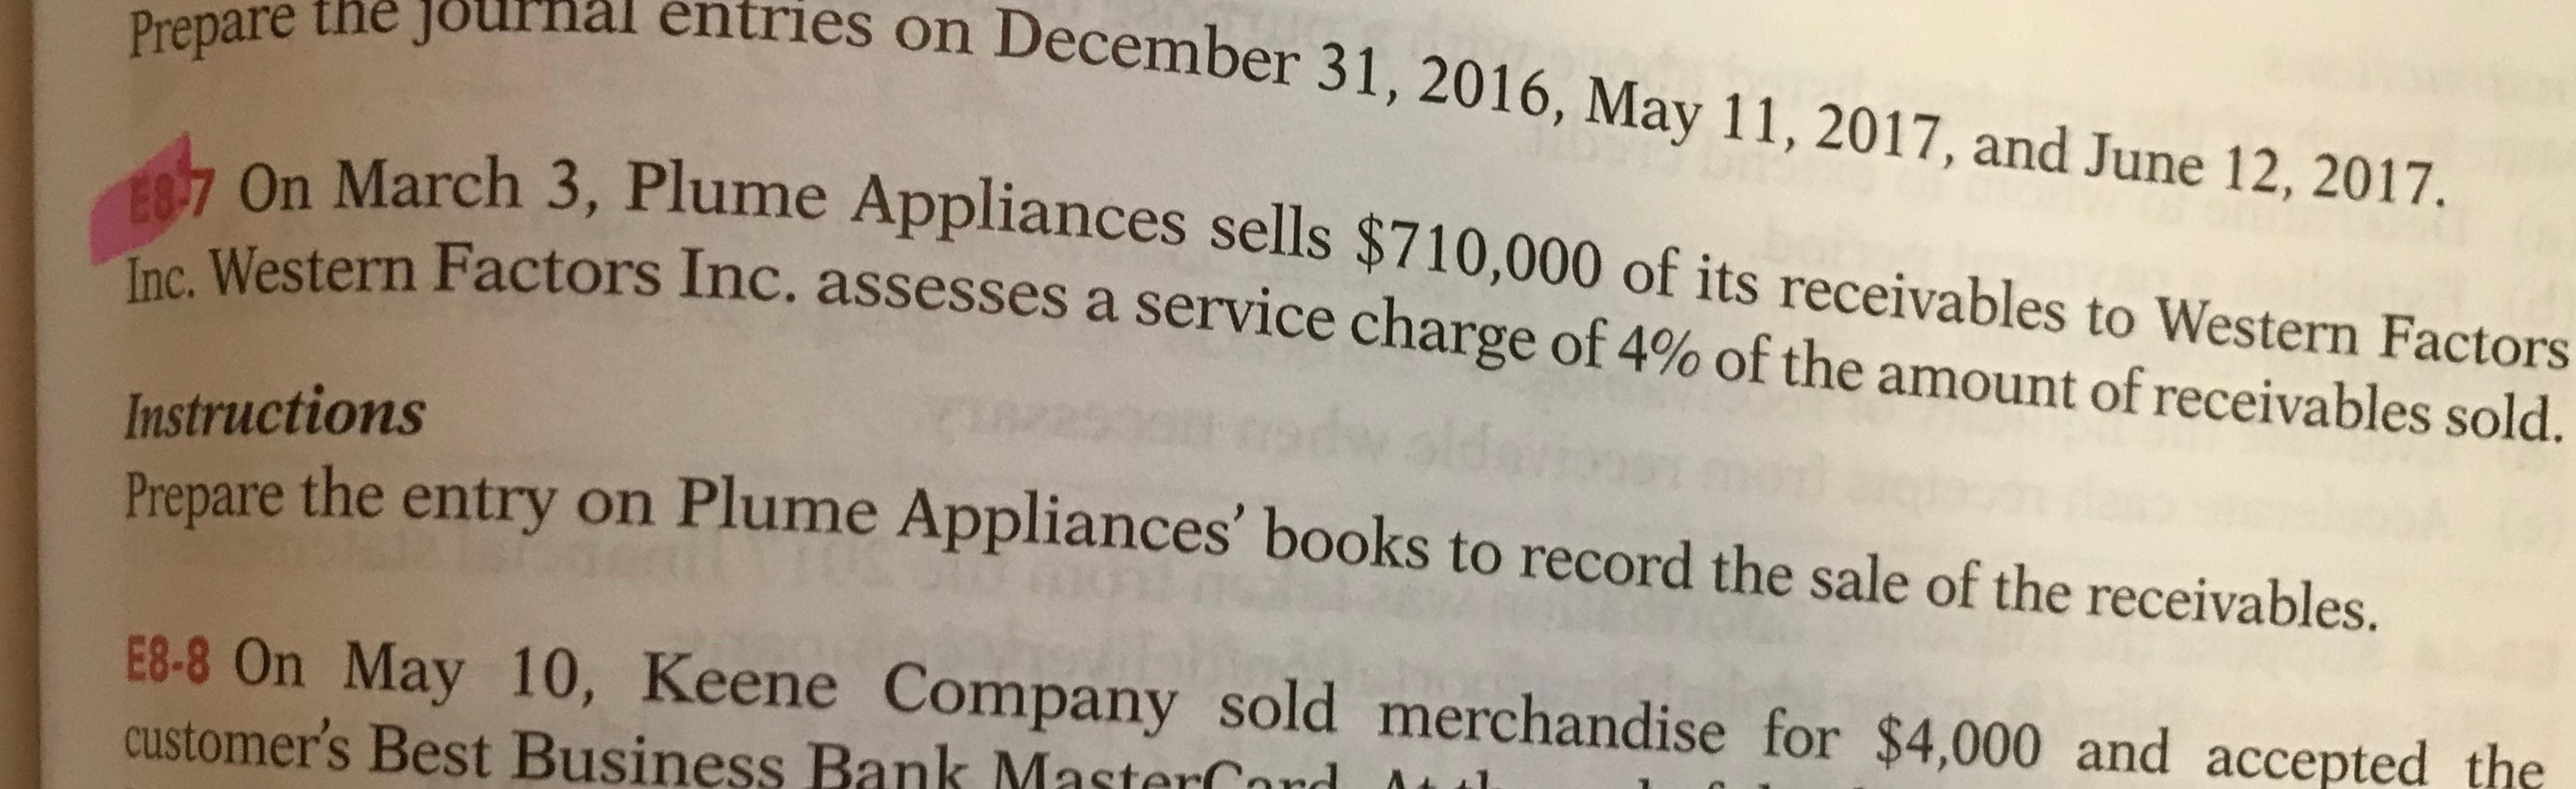 Prepare the journal entries on December 31, 2016, May 11, 2017, and June 12, 2017.
E8-7 On March 3, Plume Appliances sells $710,000 of its receivables to Western Factors
Inc. Western Factors Inc. assesses a service charge of 4% of the amount of receivables sold.
Instructions
Prepare the entry on Plume Appliances' books to record the sale of the receivables.
E8-8 On May 10, Keene Company sold merchandise for $4,000 and accepted the
customer's Best Business Bank MasterCor
